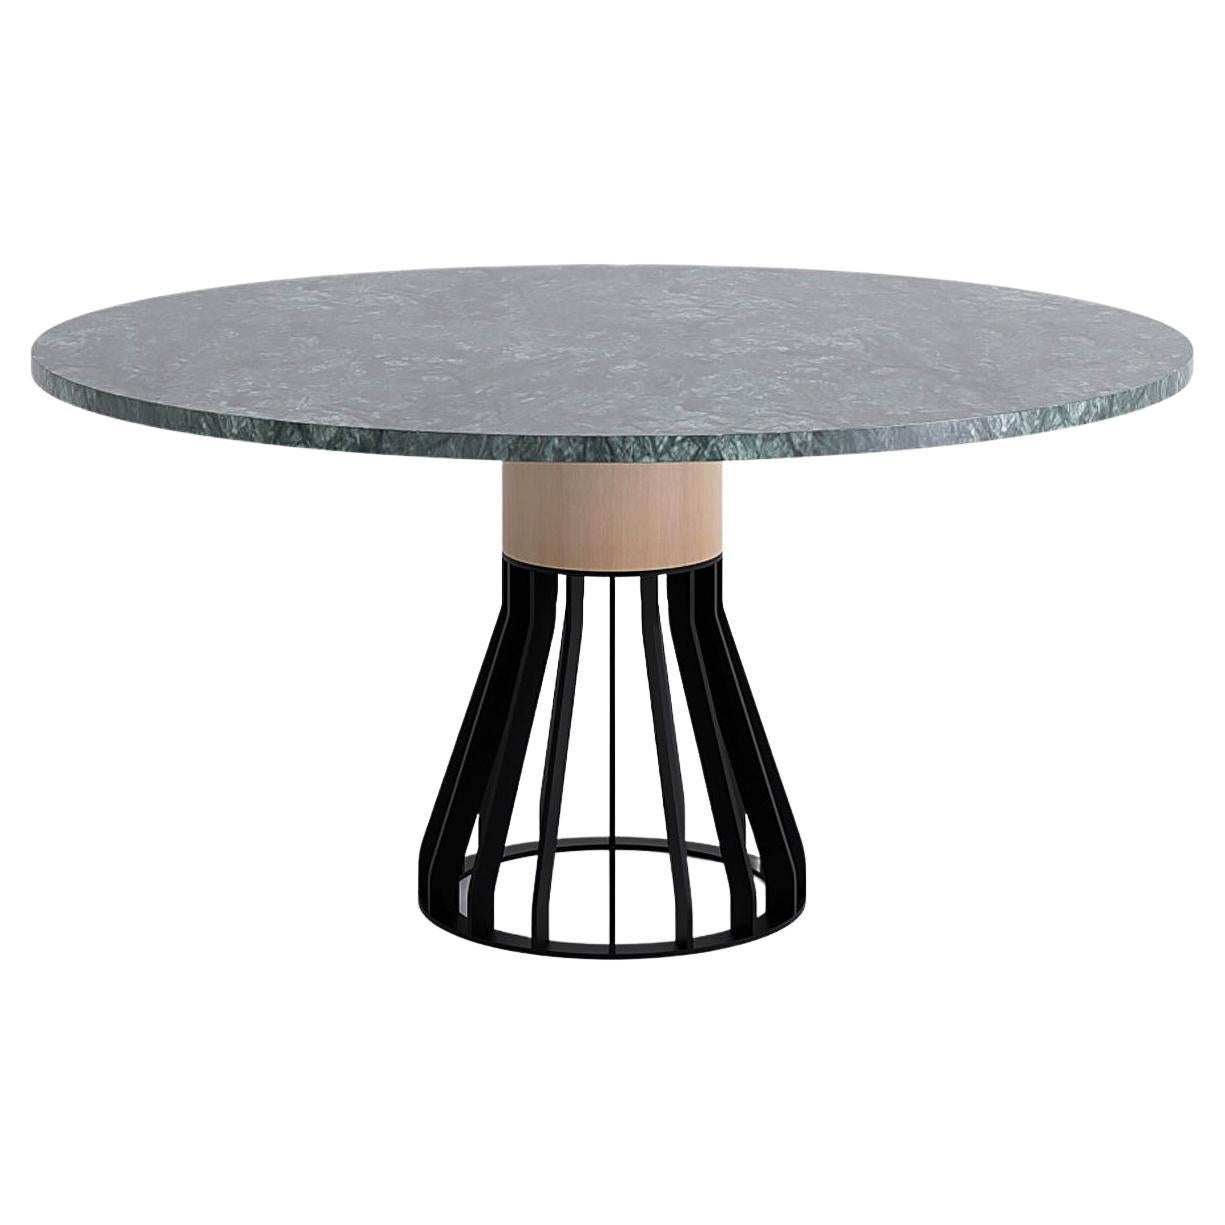 Mewoma Dining Table, Black Legs Green Top by Jonah Takagi for La Chance